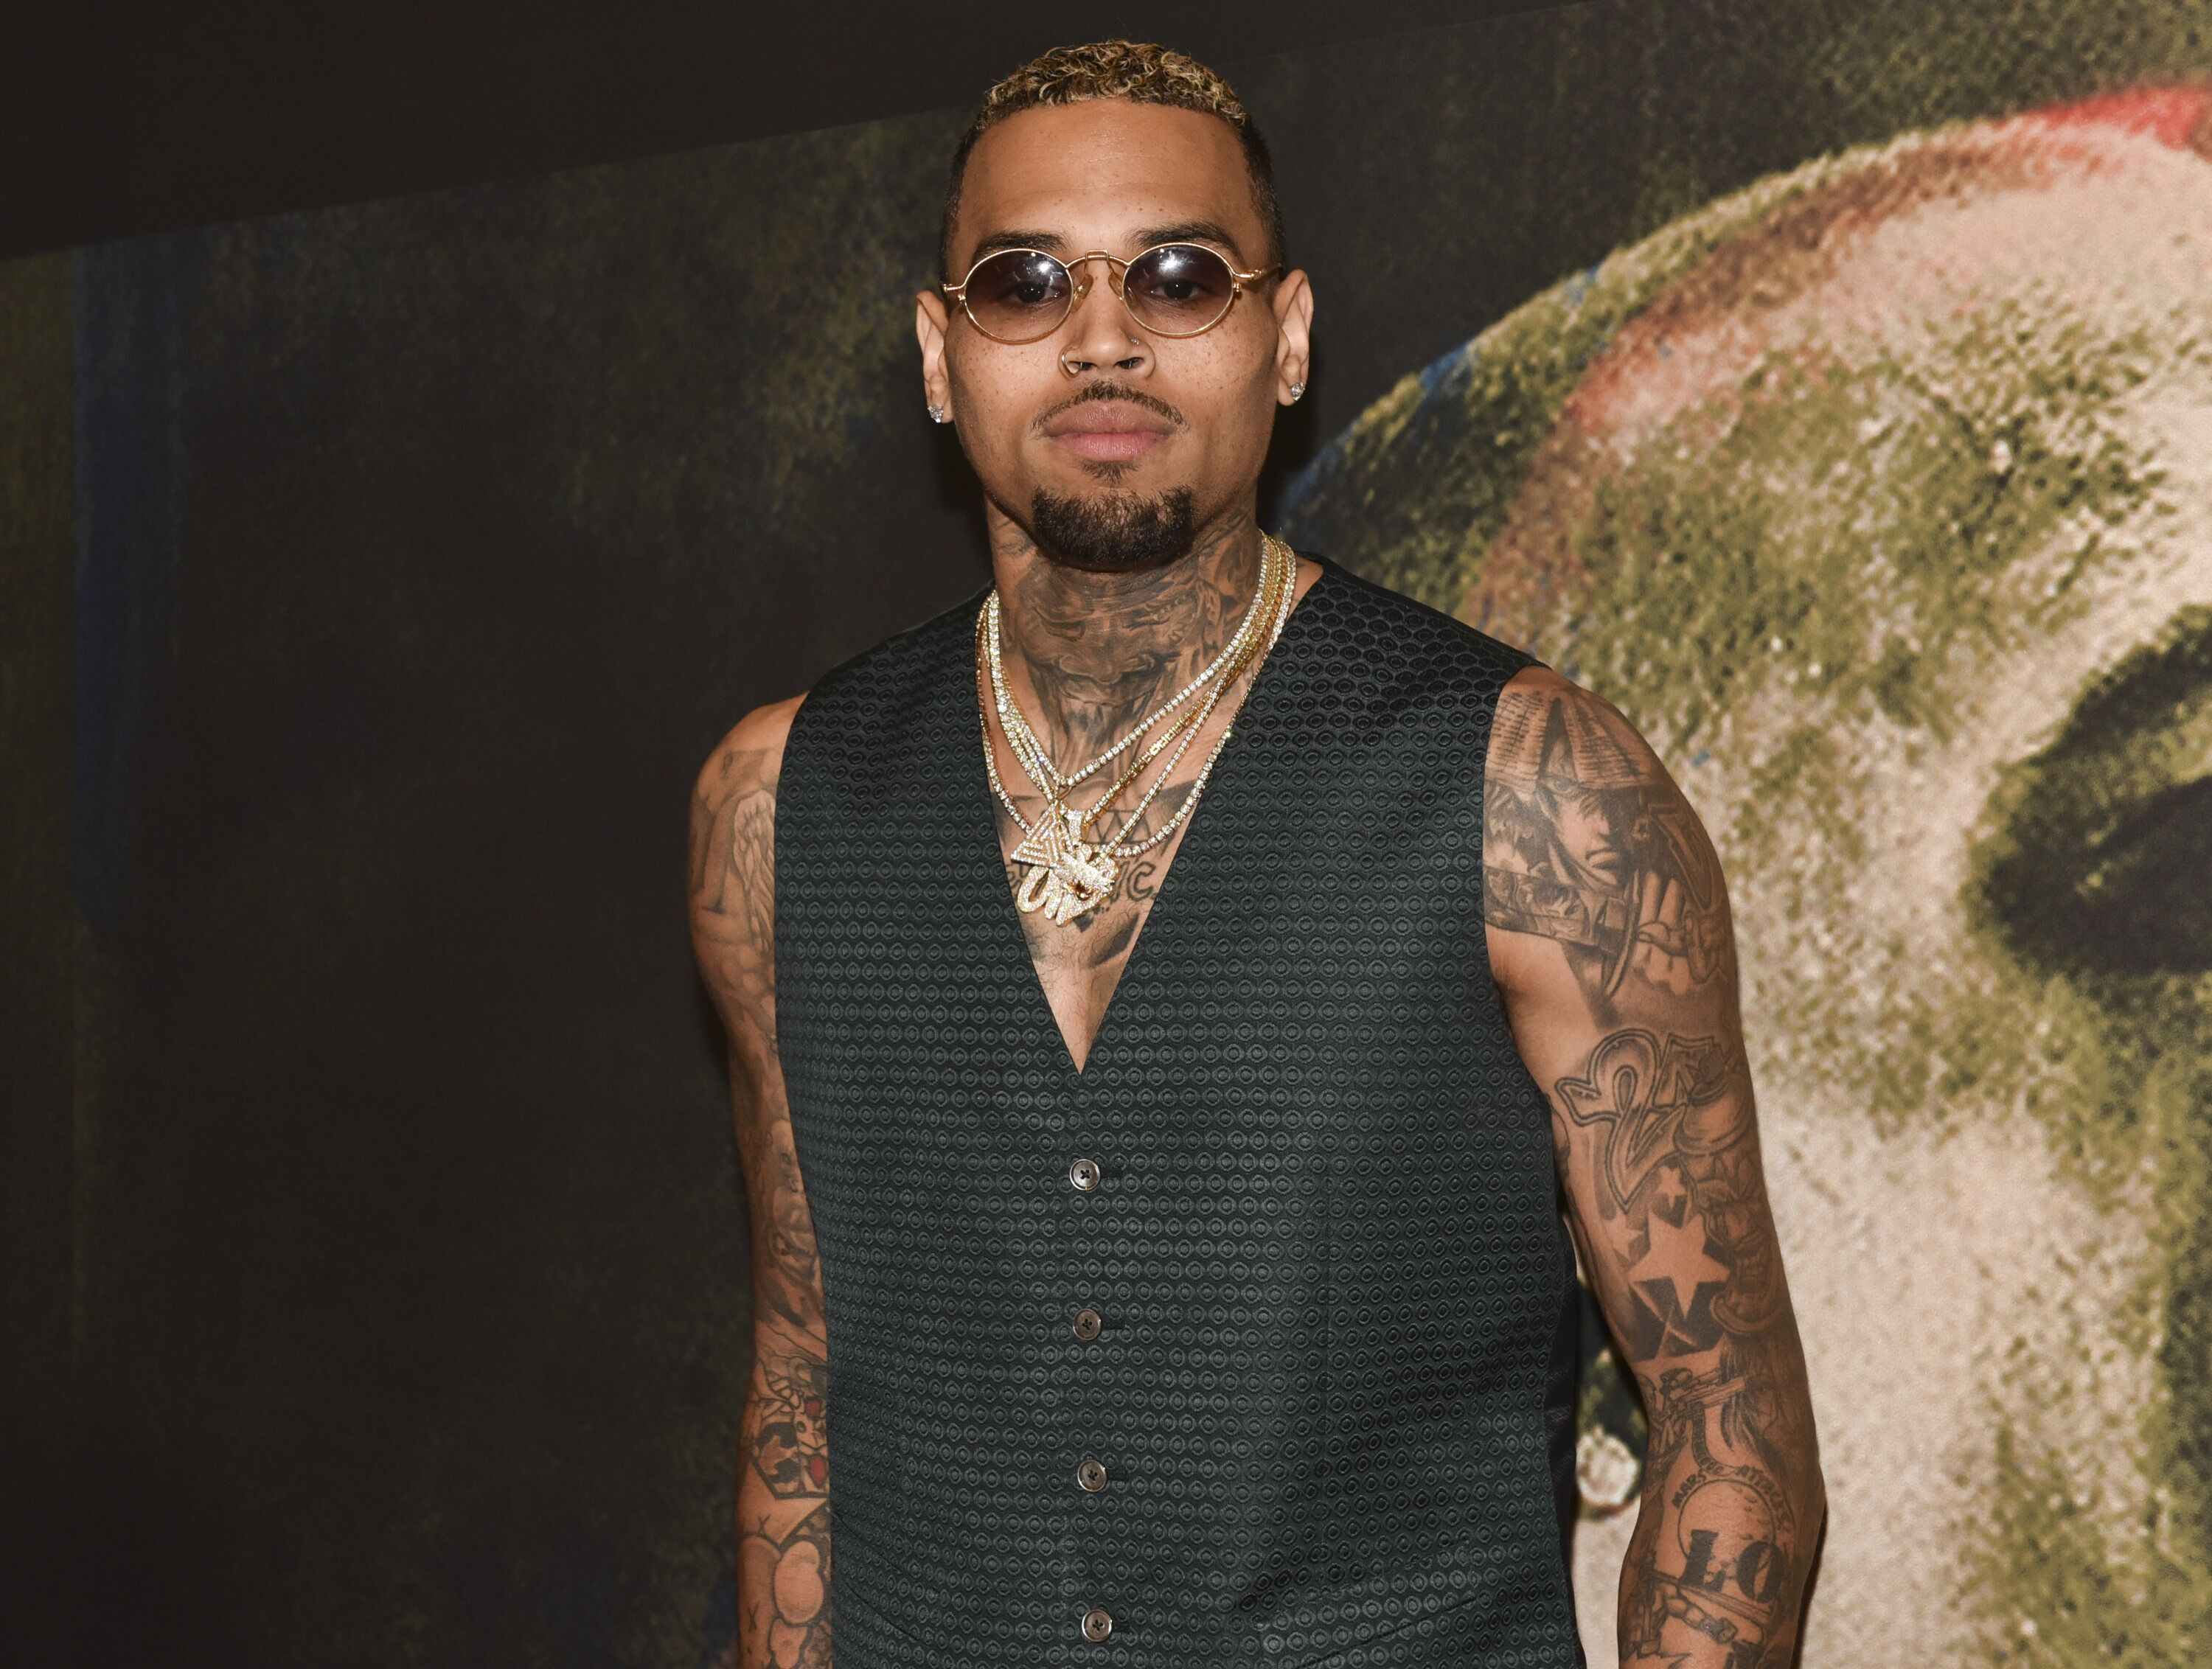 A portrait of Chris Brown | Source: Getty Images/GlobalImagesUkraine